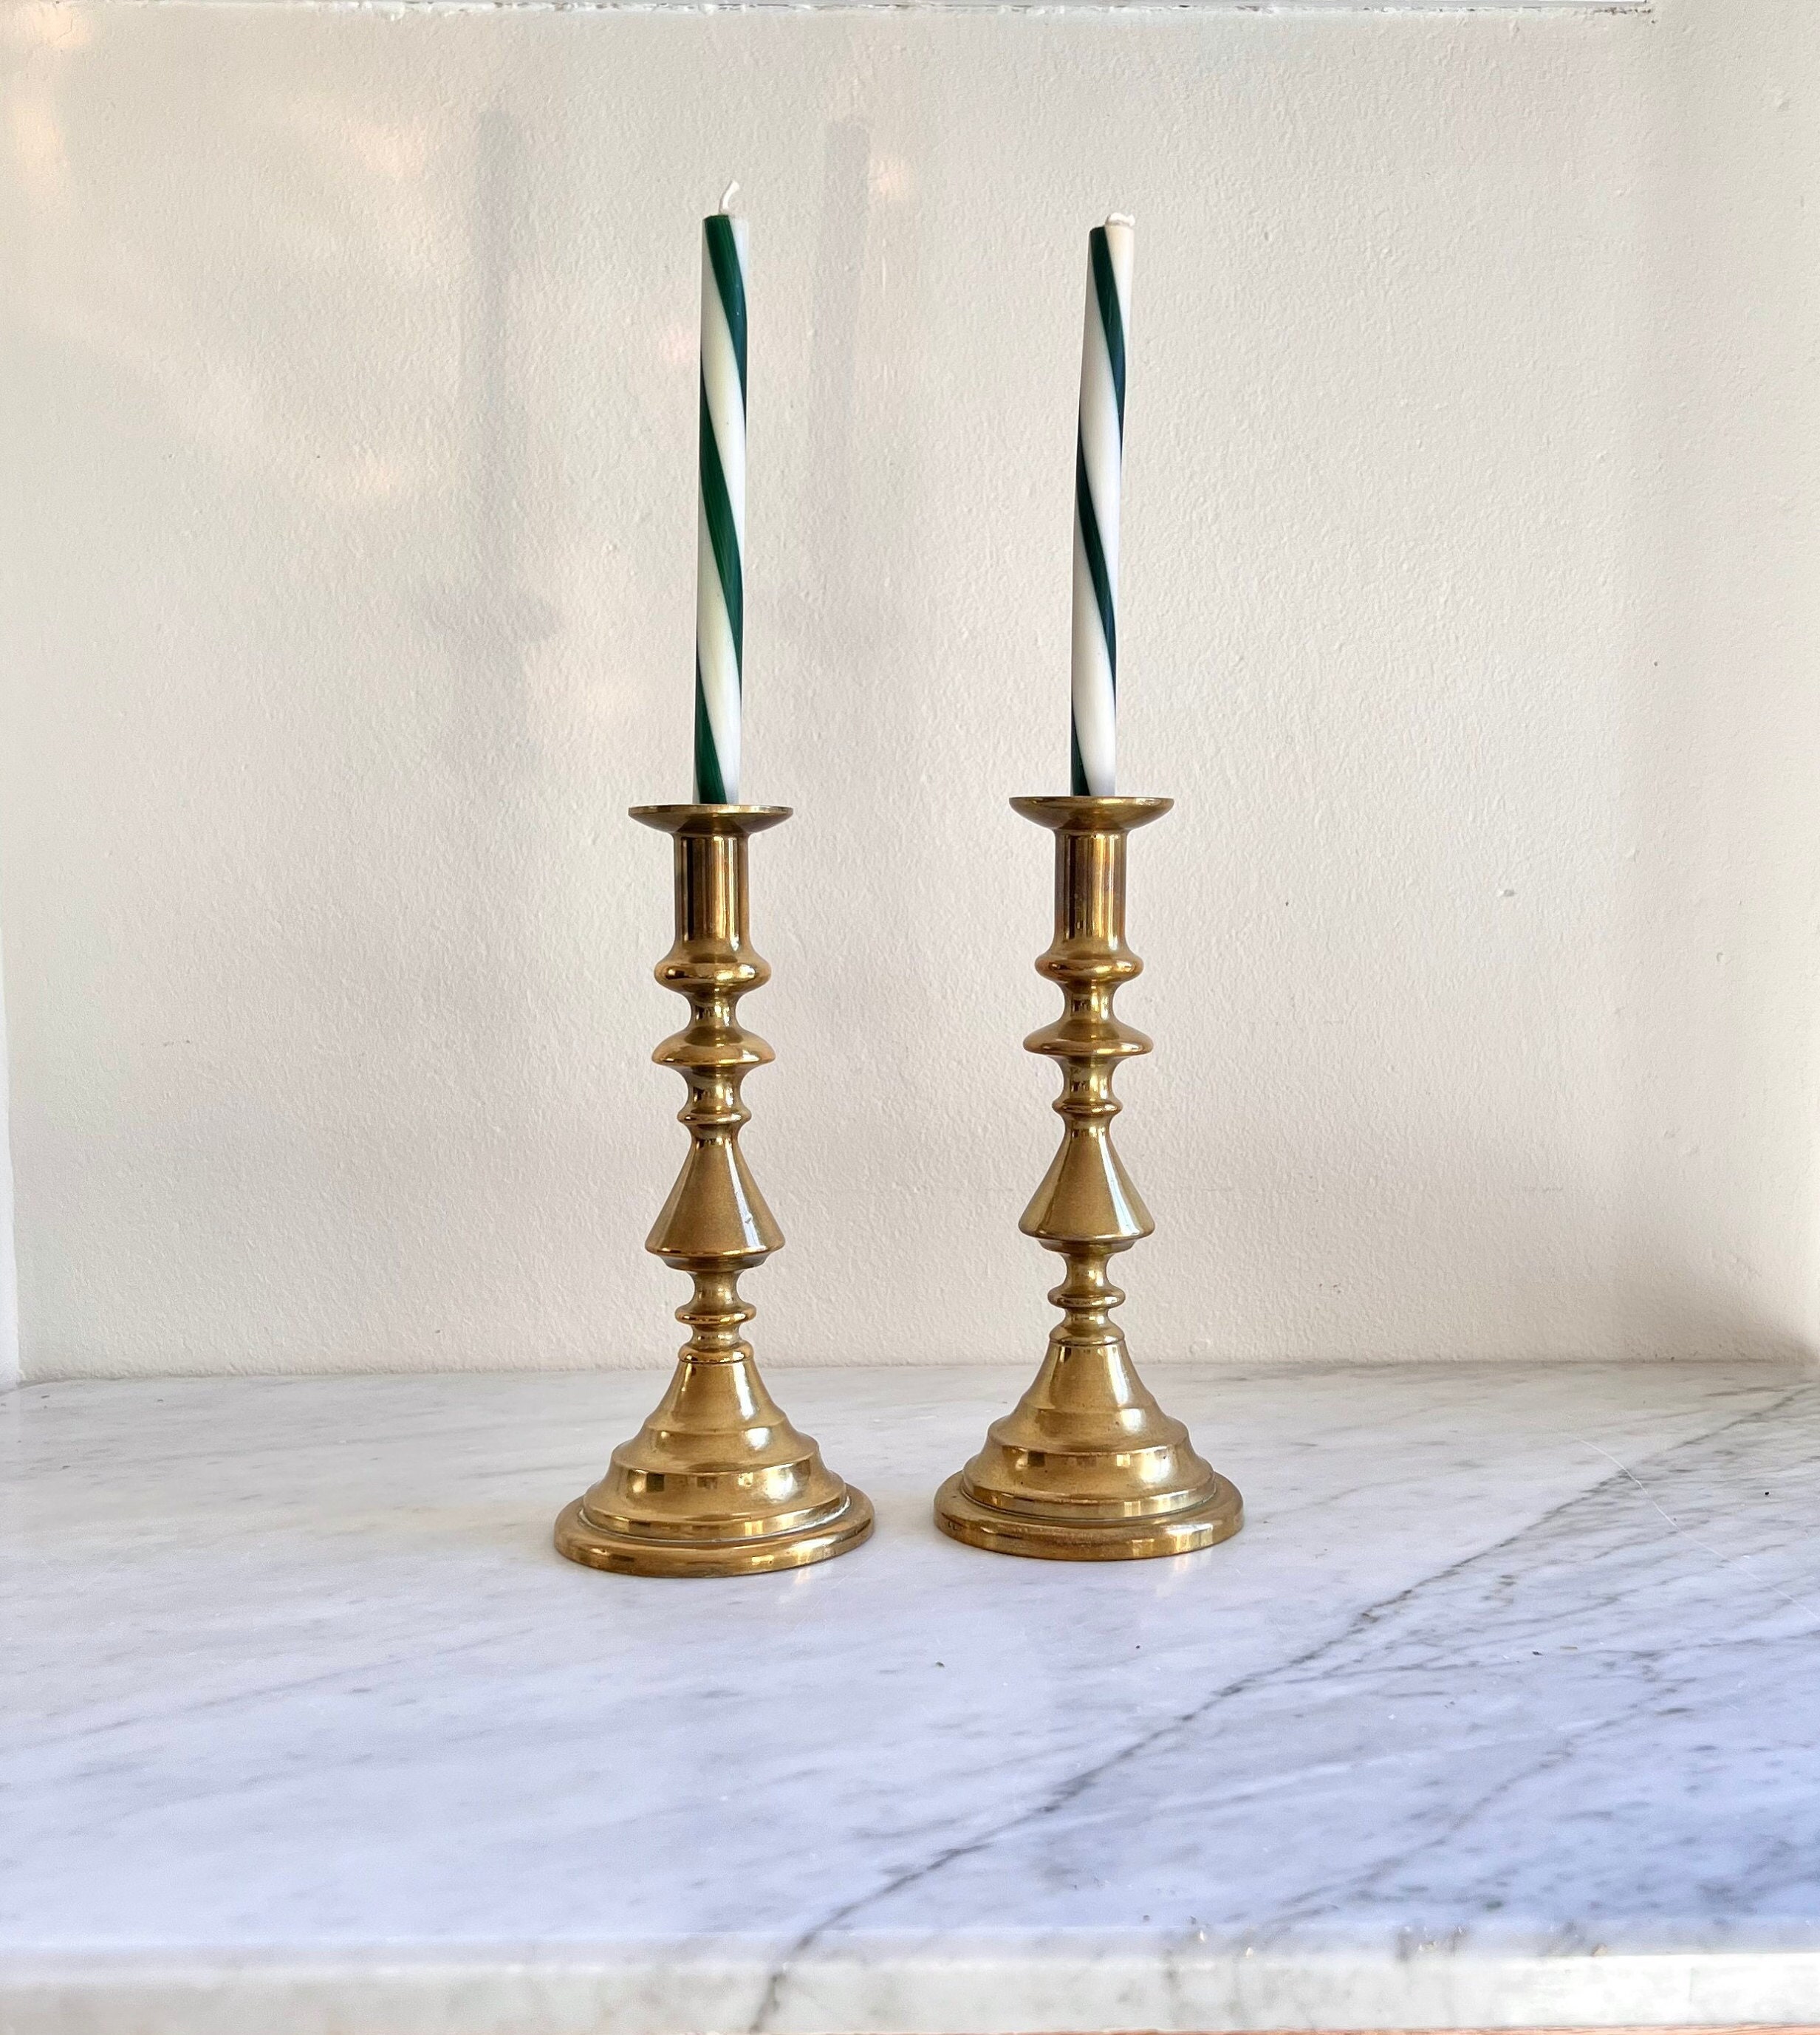 Set of 2 Brass Taper Candle Holders, Centerpiece Table Decorative Vintage,  Modern, Metal Candlestick Holders for Reception Candlelight Dinner